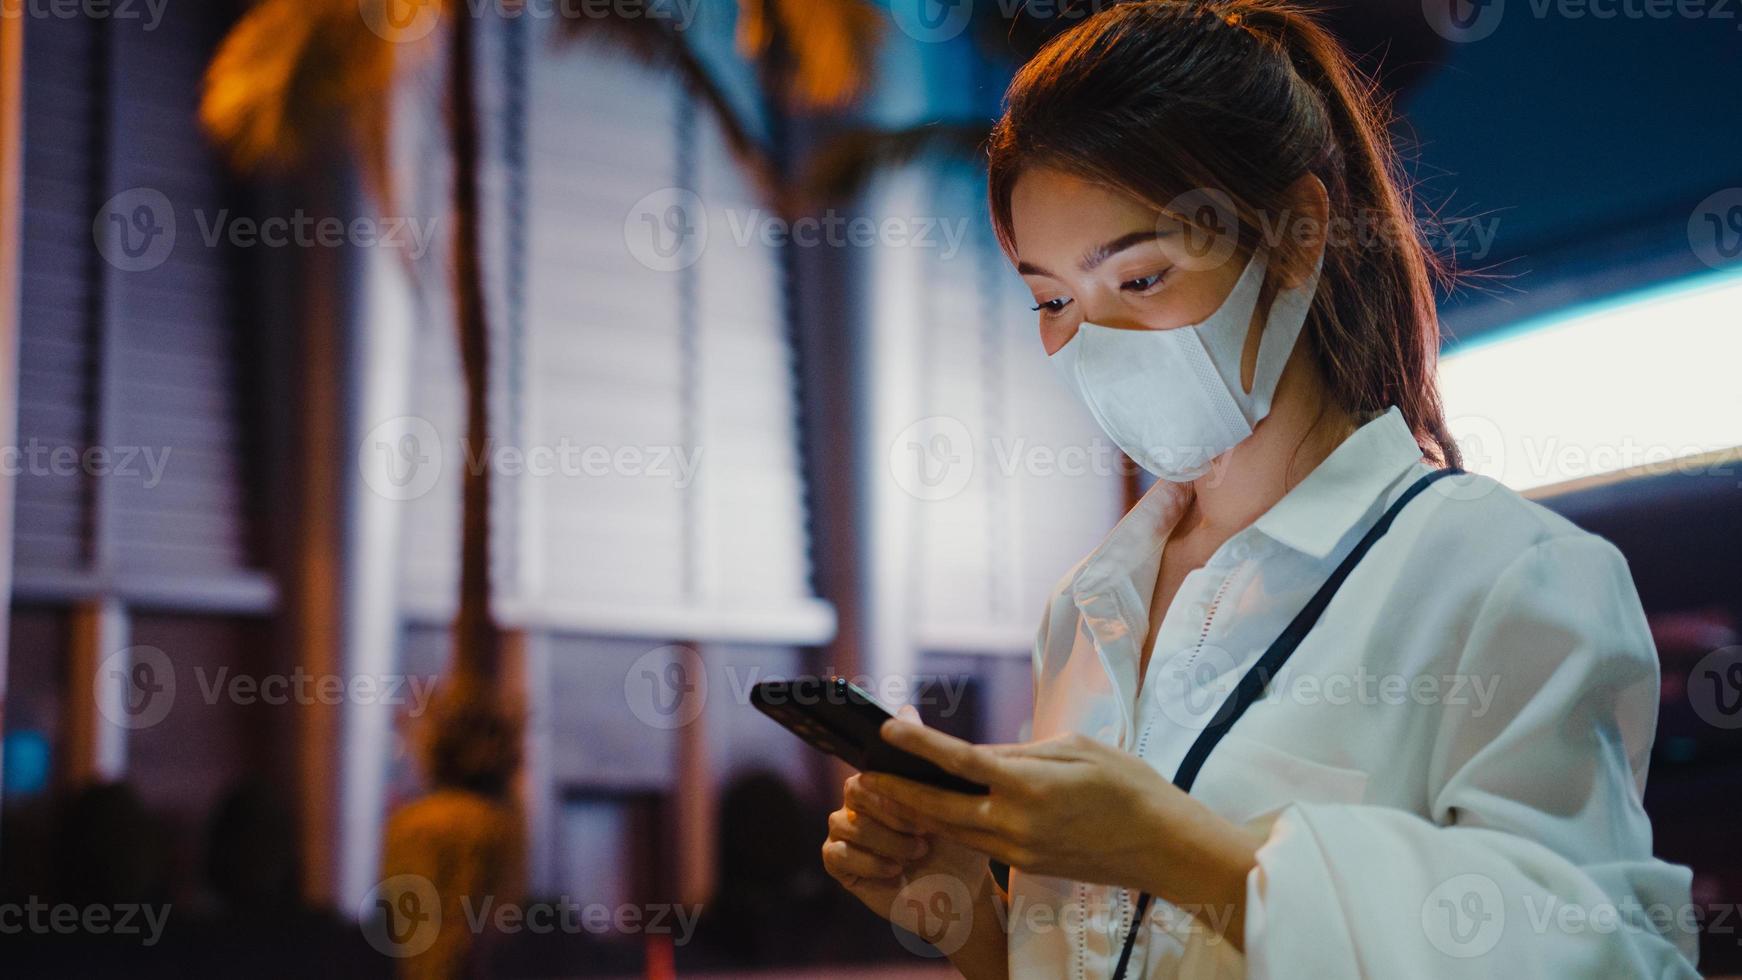 Young Asia businesswoman in fashion office clothes wearing medical face mask using smart phone typing text message while stand outdoors in urban modern city at night. Business on the go concept. photo